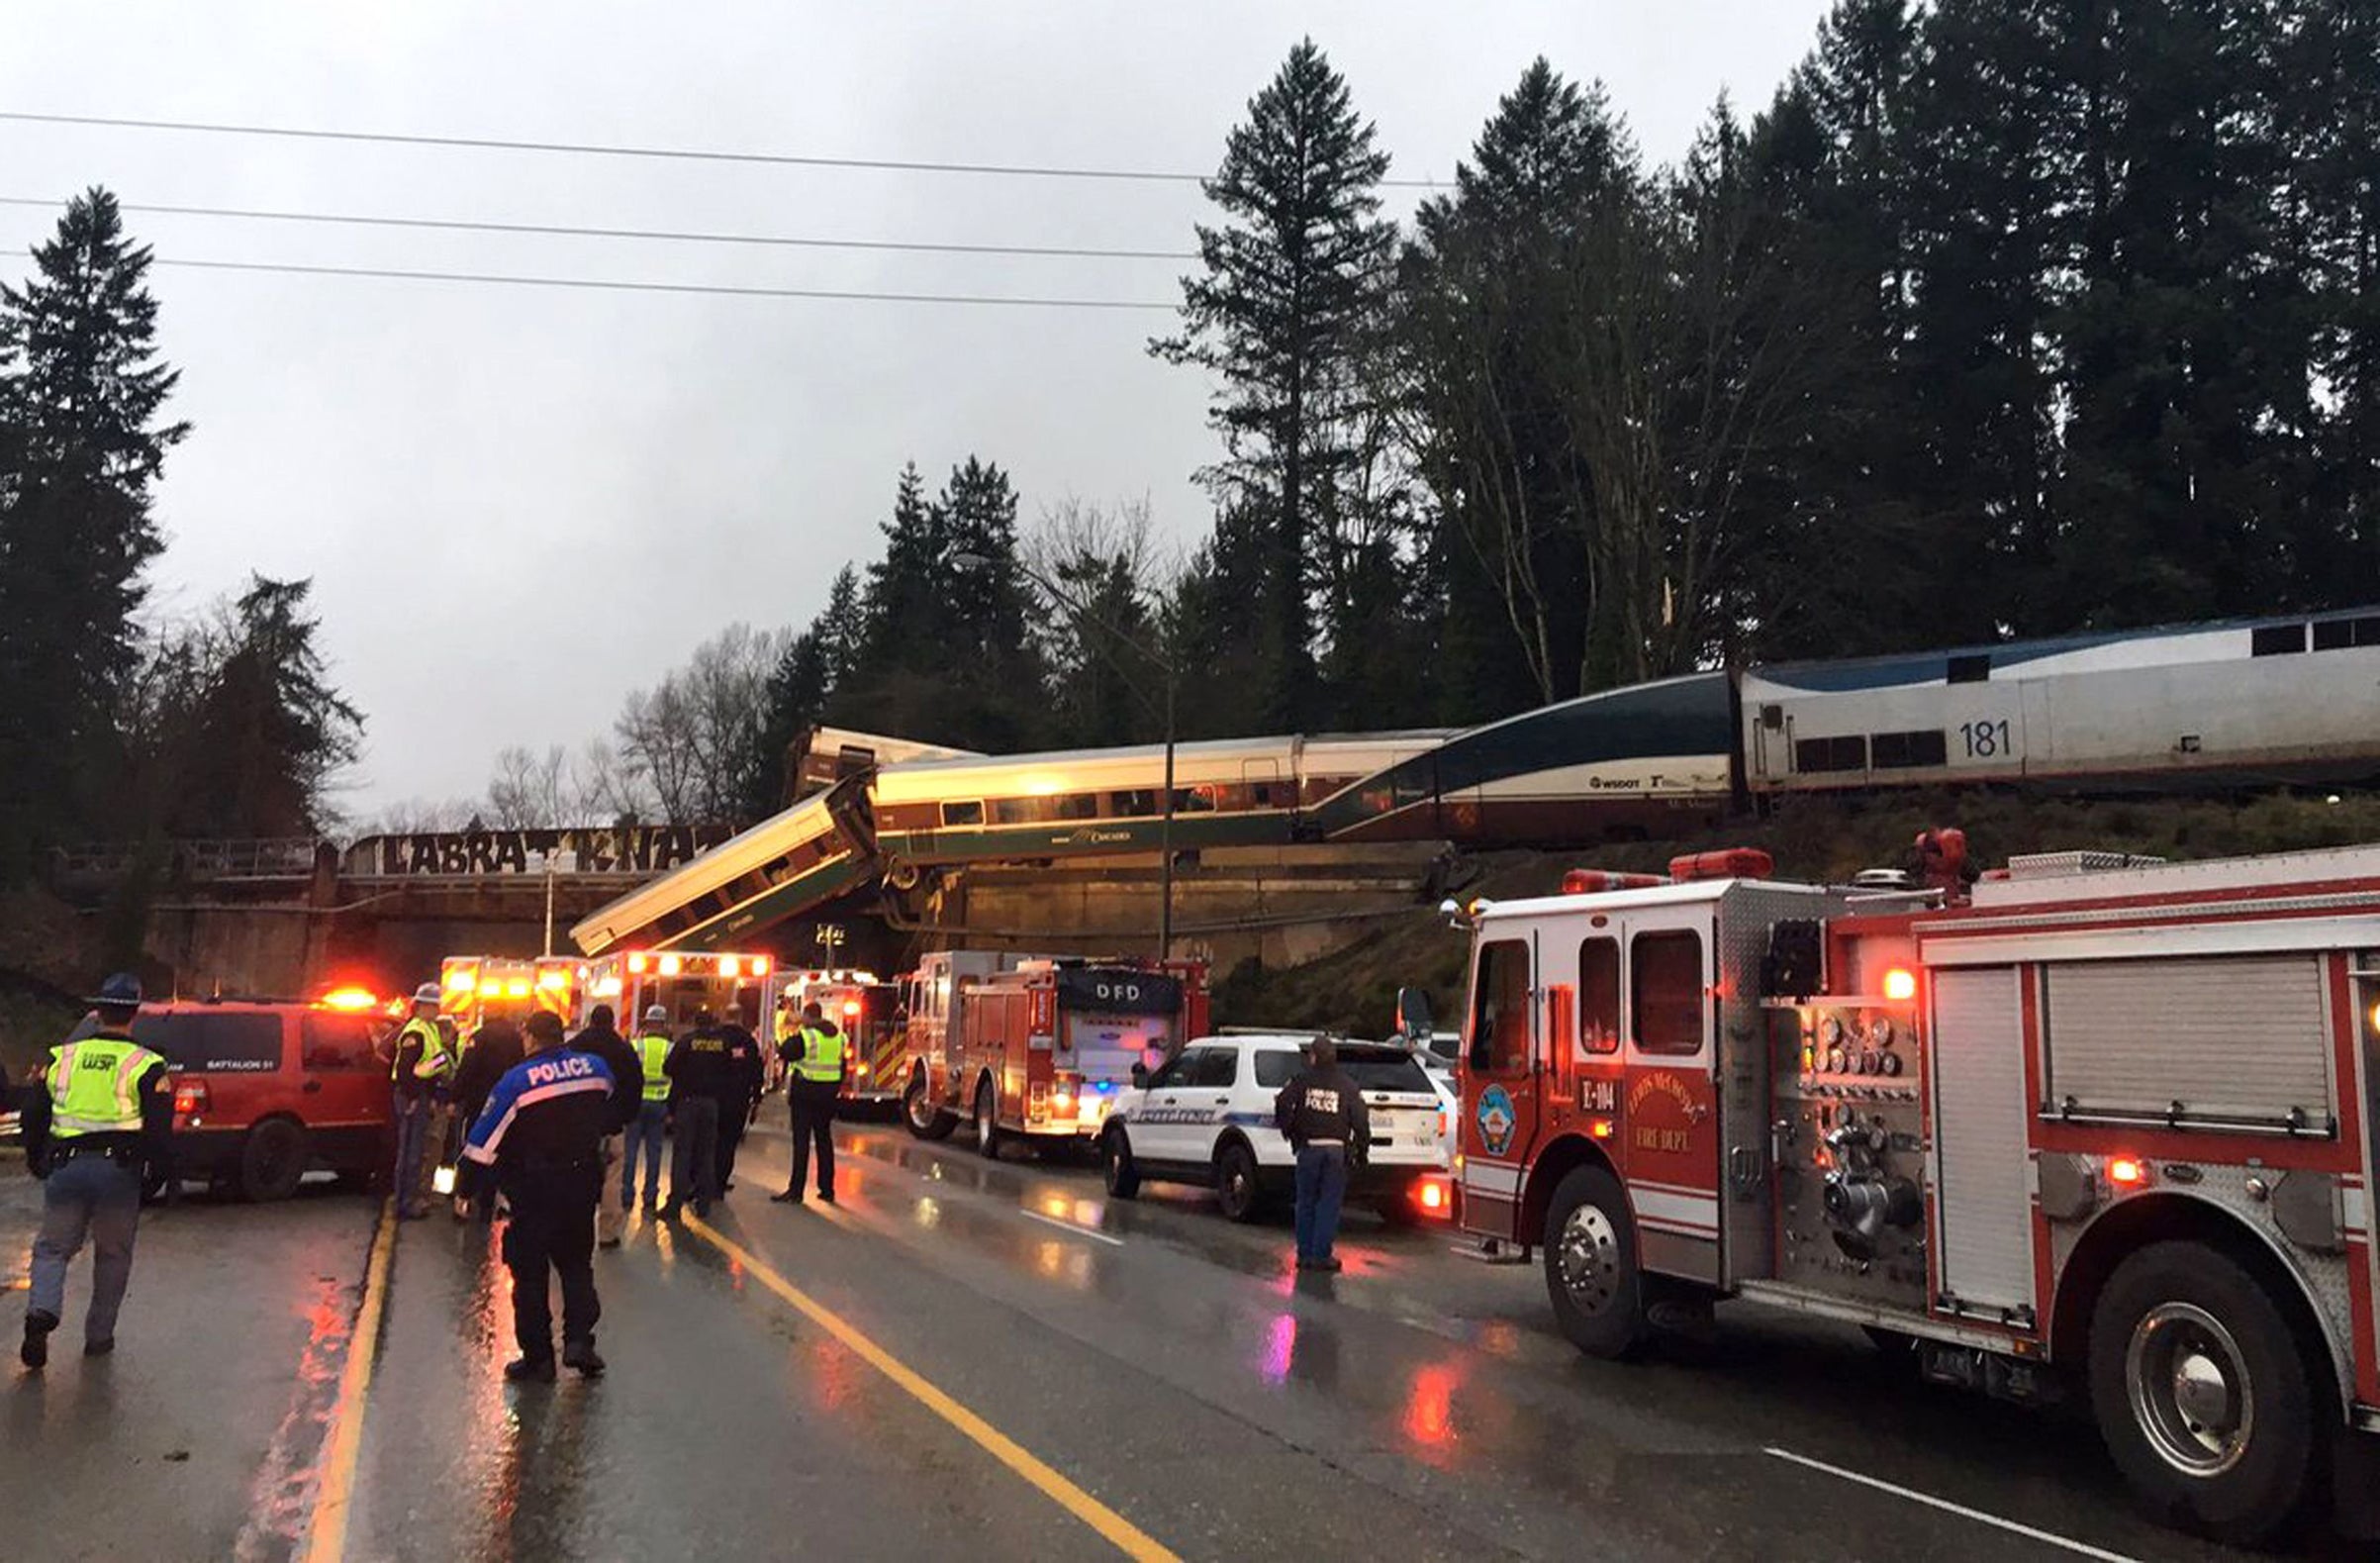 President Trump Proposed A Huge Cut To Rail Spending. Then Blamed The Amtrak Derailment On Poor Infrastructure